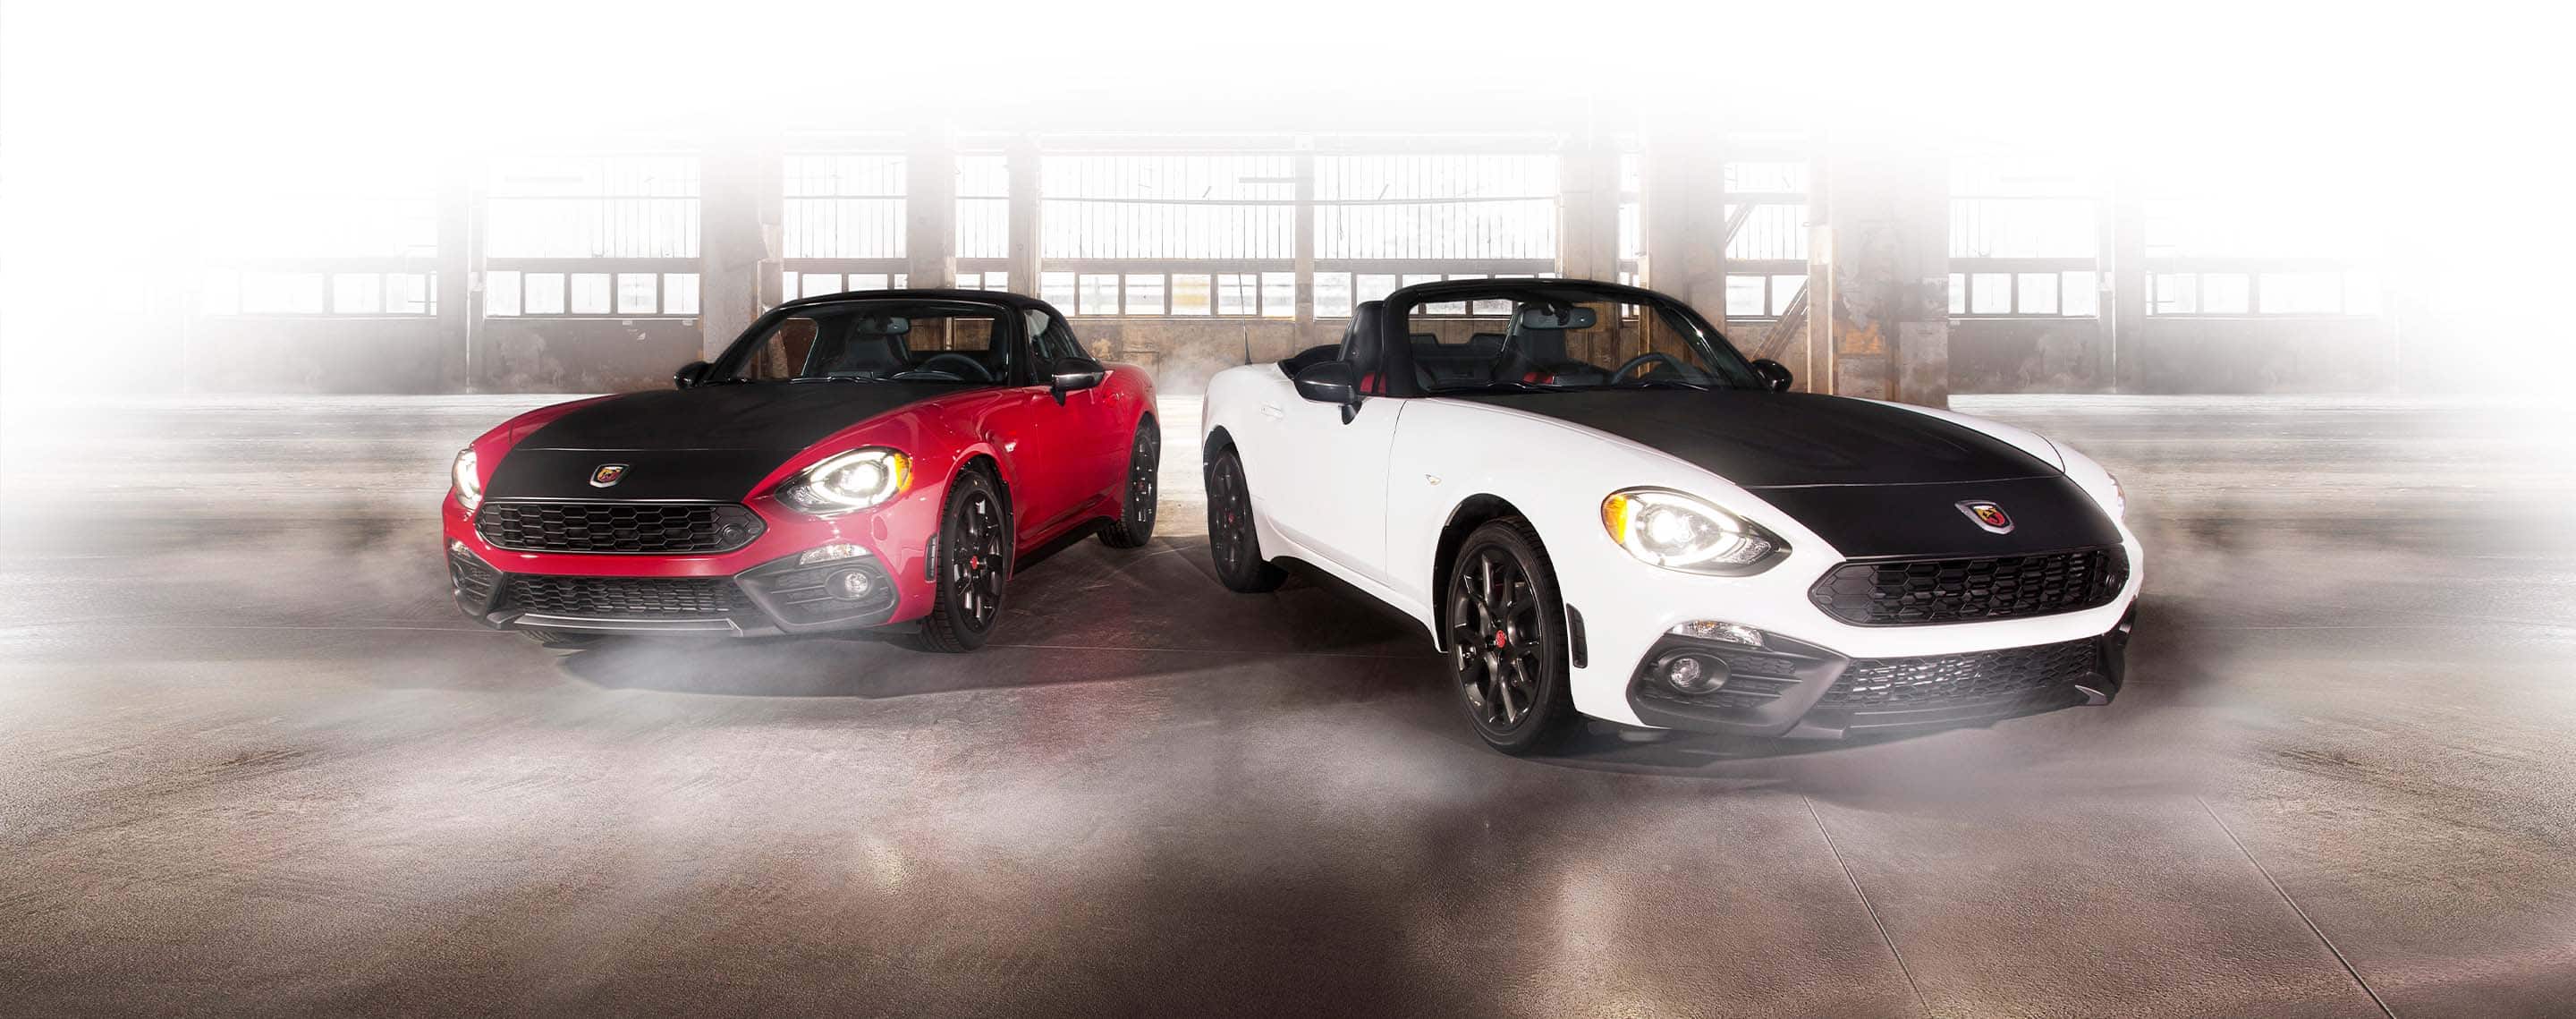 A red 2020 Fiat 124 Spider Abarth and a white 2020 Fiat 124 Spider Abarth with a black hood and its top down, side-by-side in a parking garage.